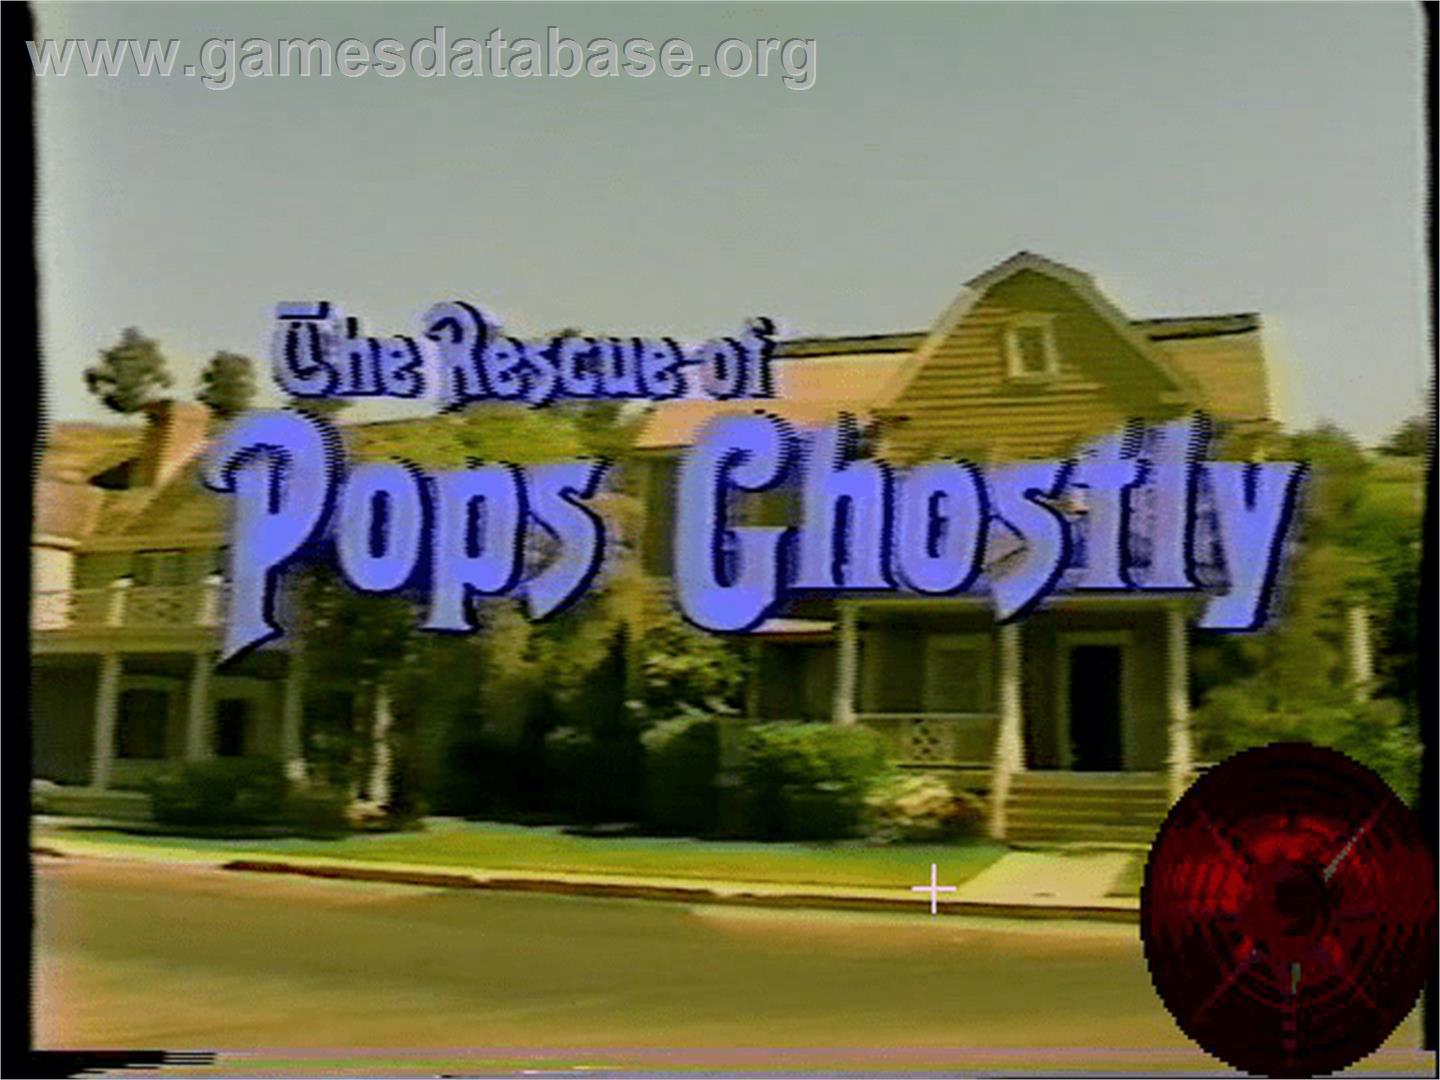 Rescue of Pops Ghostly , The - WoW Action Max - Artwork - Title Screen